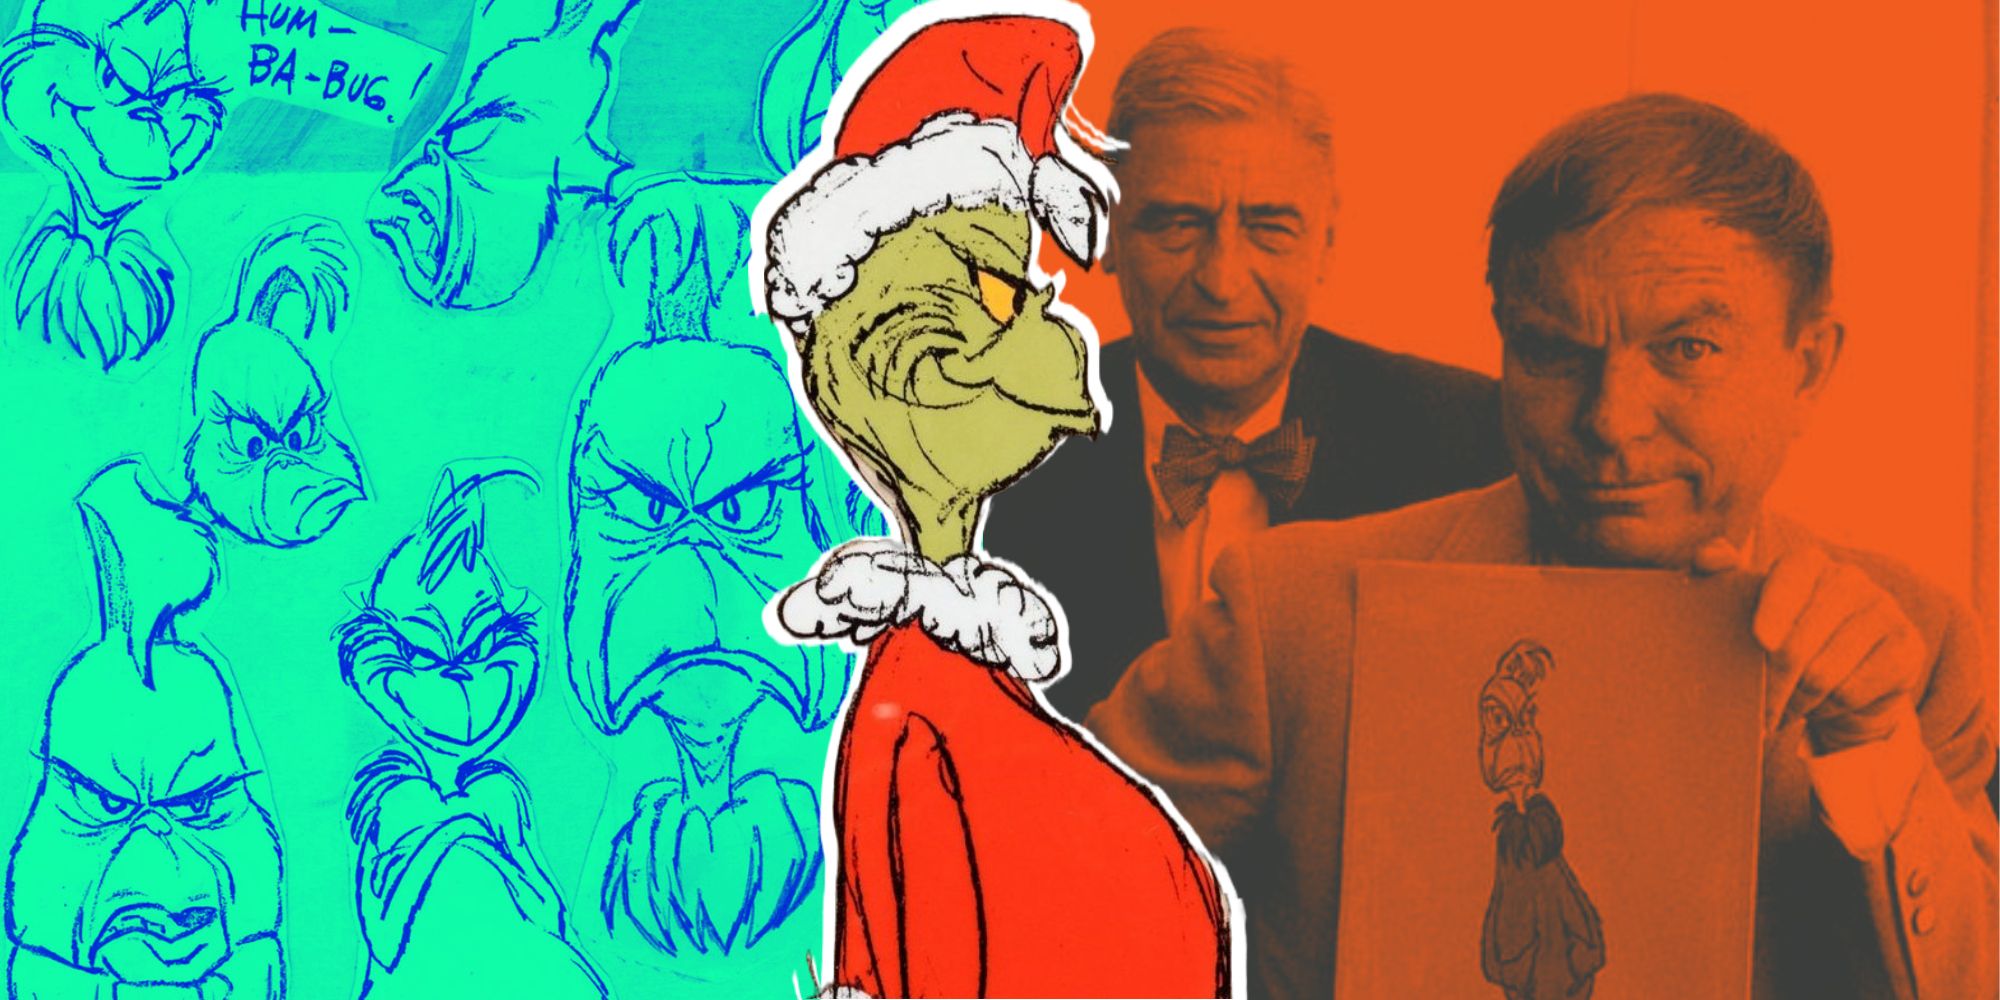 Featured Image with sketches of the Grinch (1966) and Dr. Seuss with Chuck Jones.